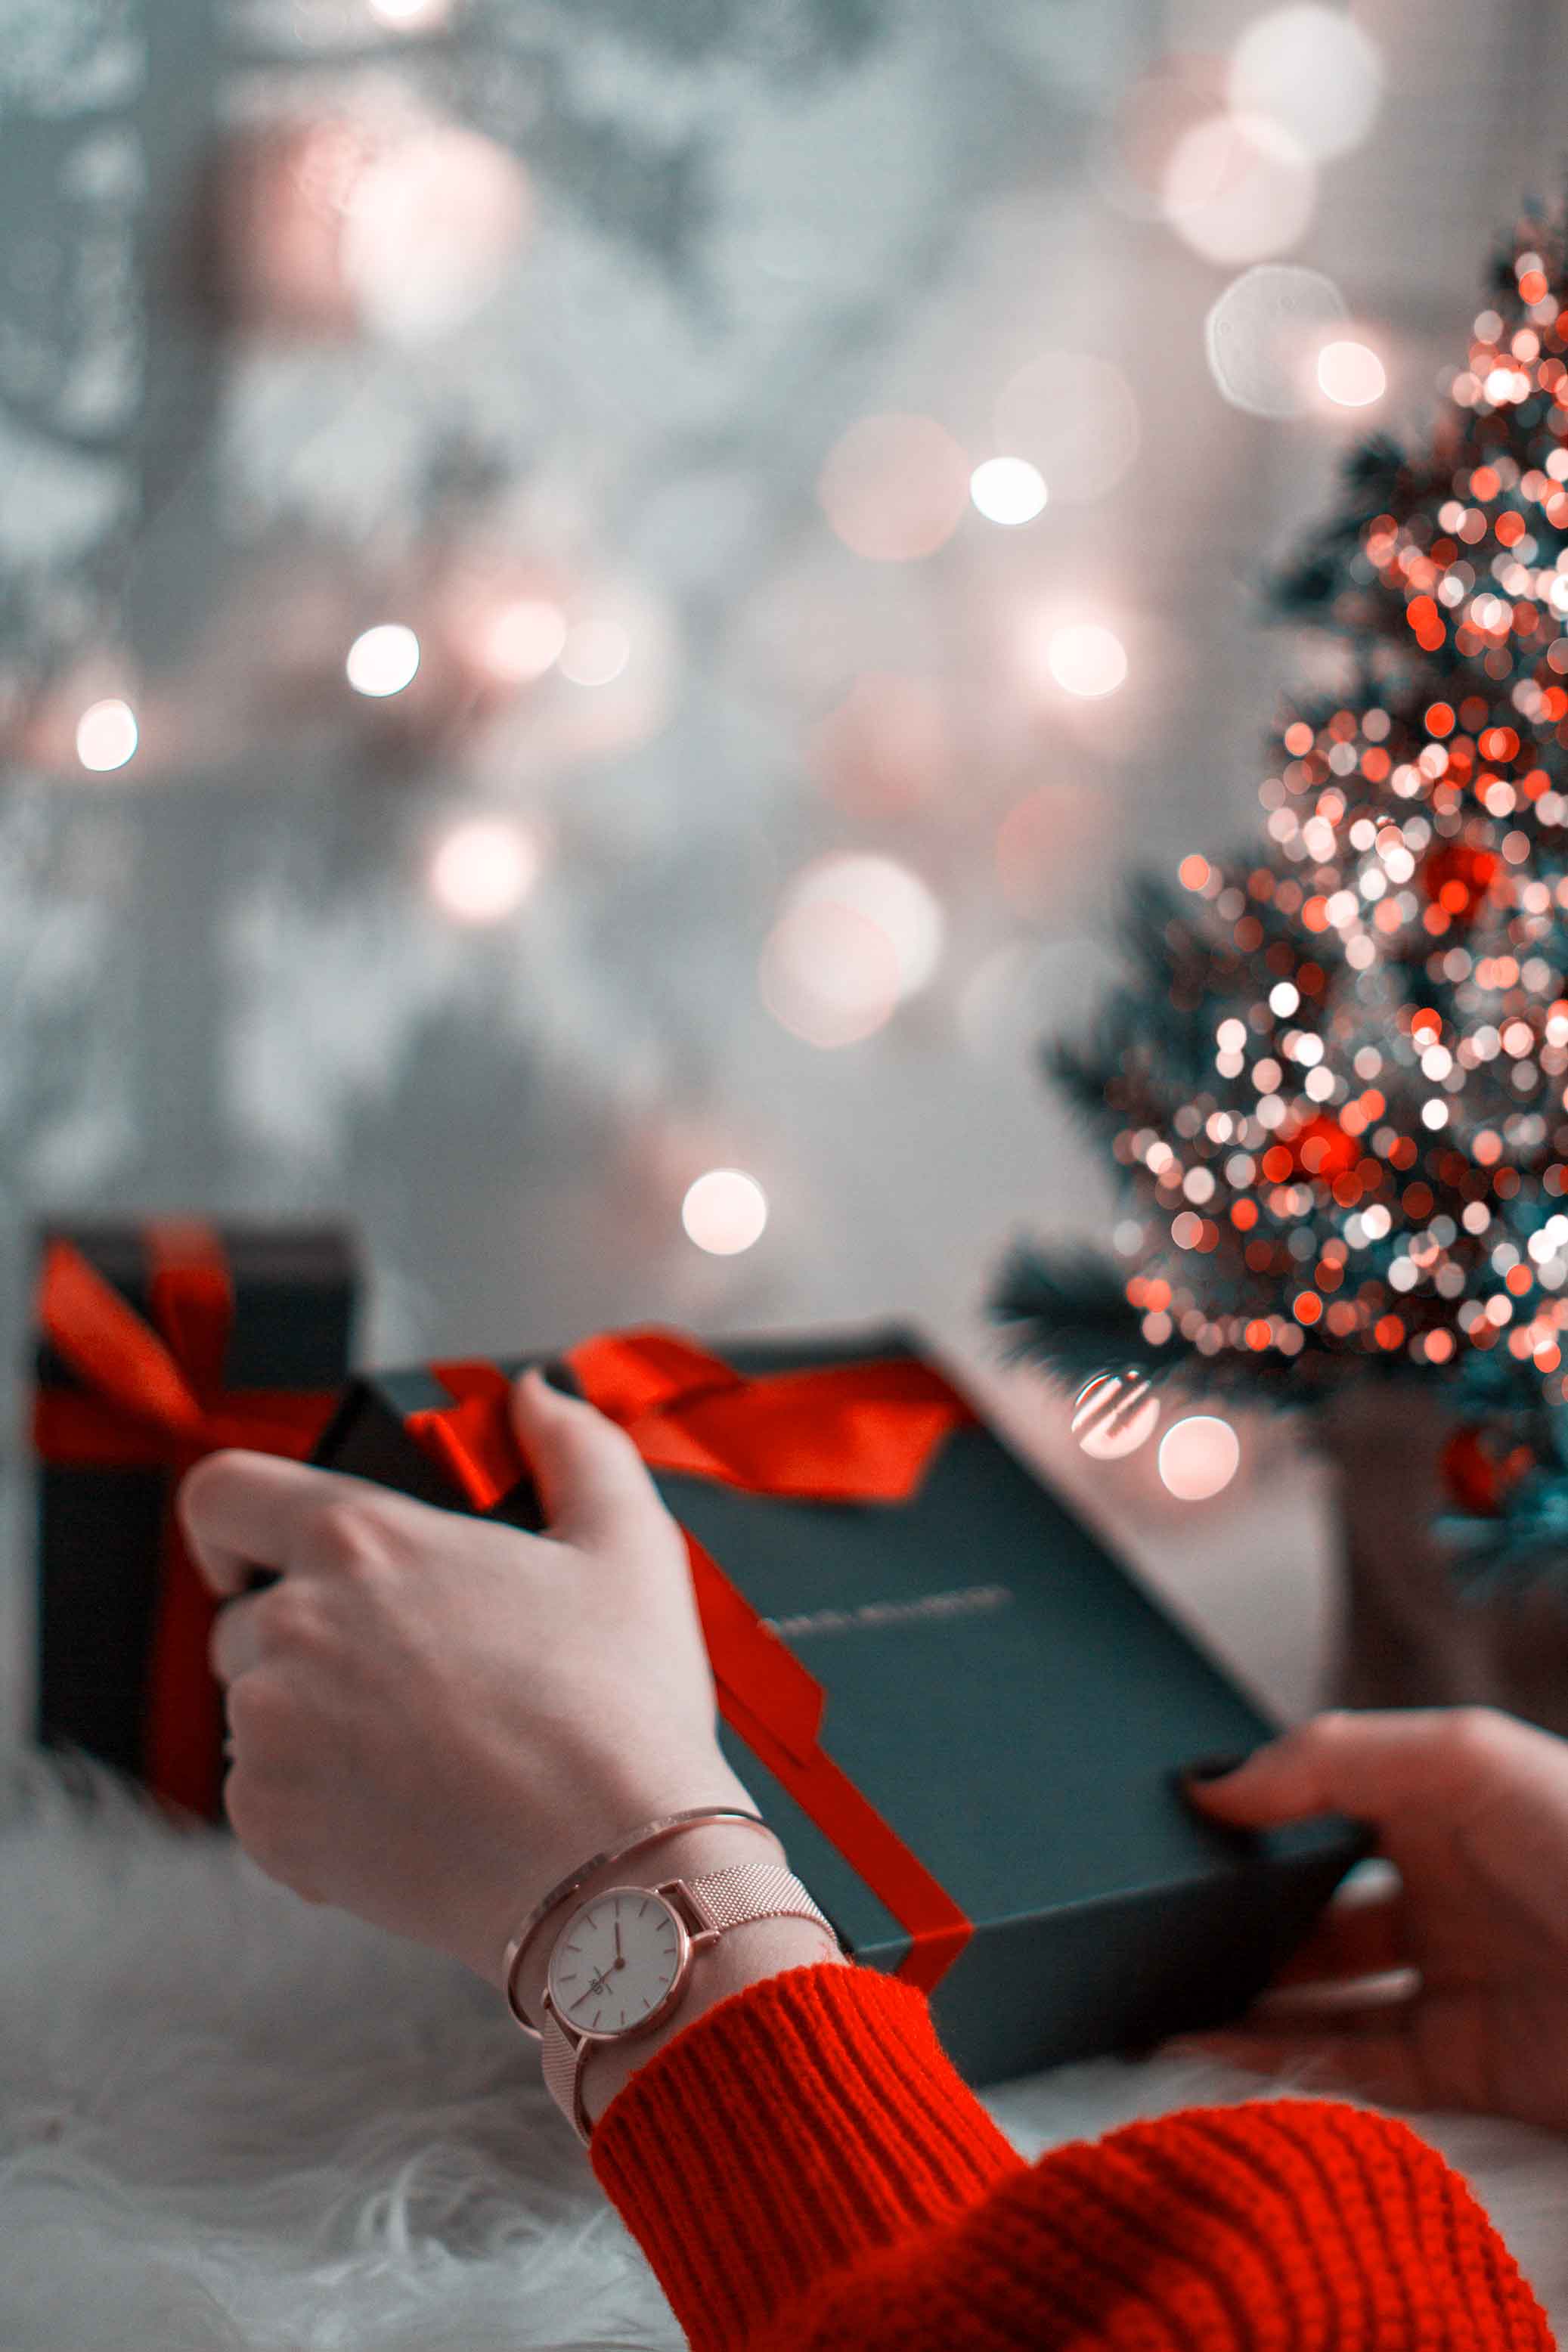 Best Christmas Gift Ideas With a Personal Touch